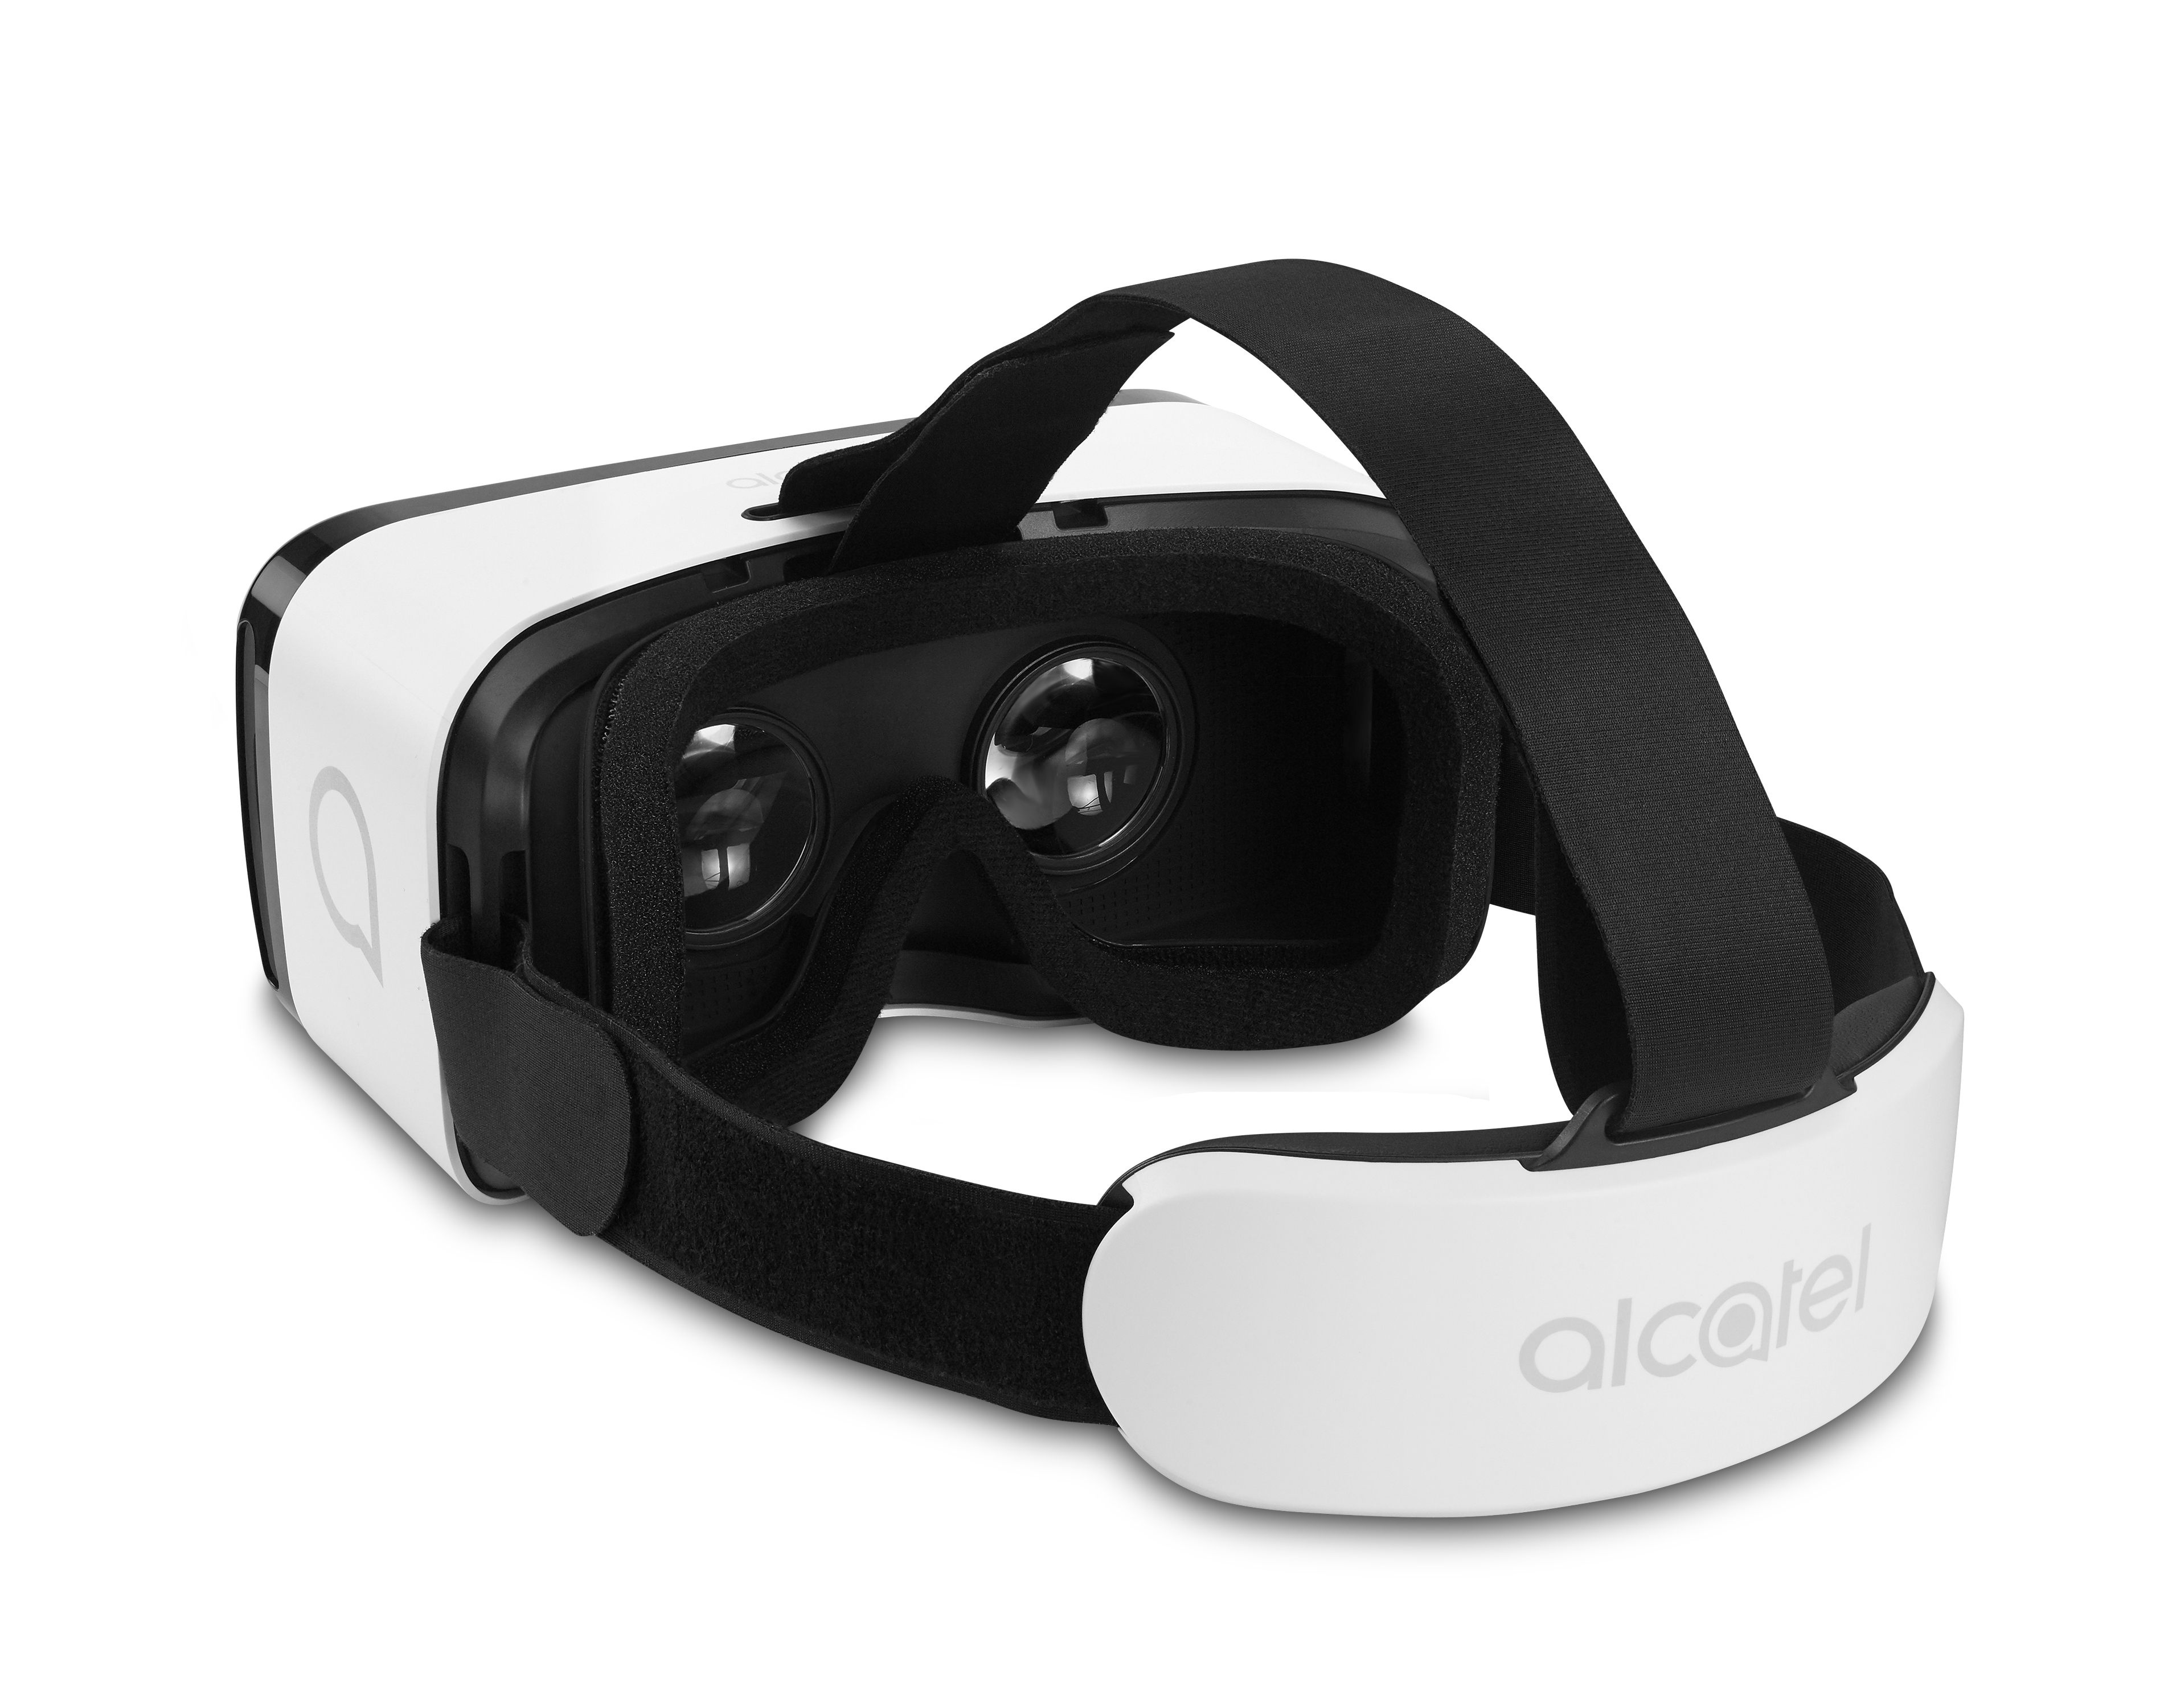 Virtual reality enabled IDOL 4S with Windows 10